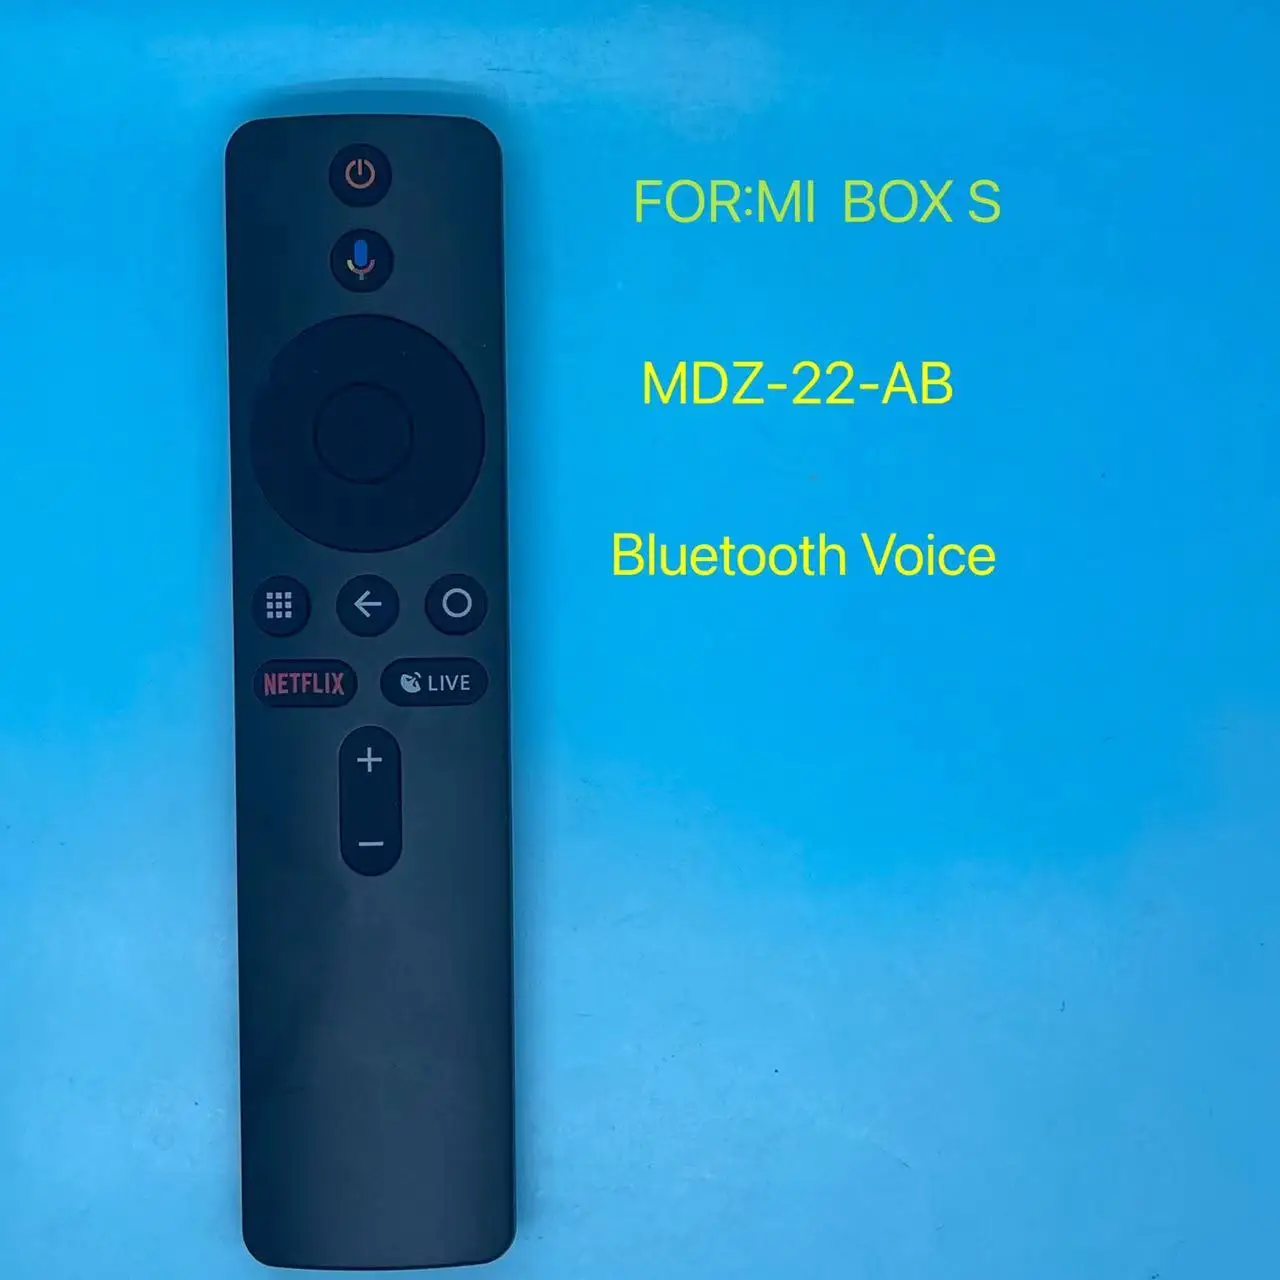 New XMRM-006 00A PROJECTOR 4Apro with voice for Xiaomi MI Box S MDZ-22-AB smart TV box Bluetooth RF remote control | Электроника